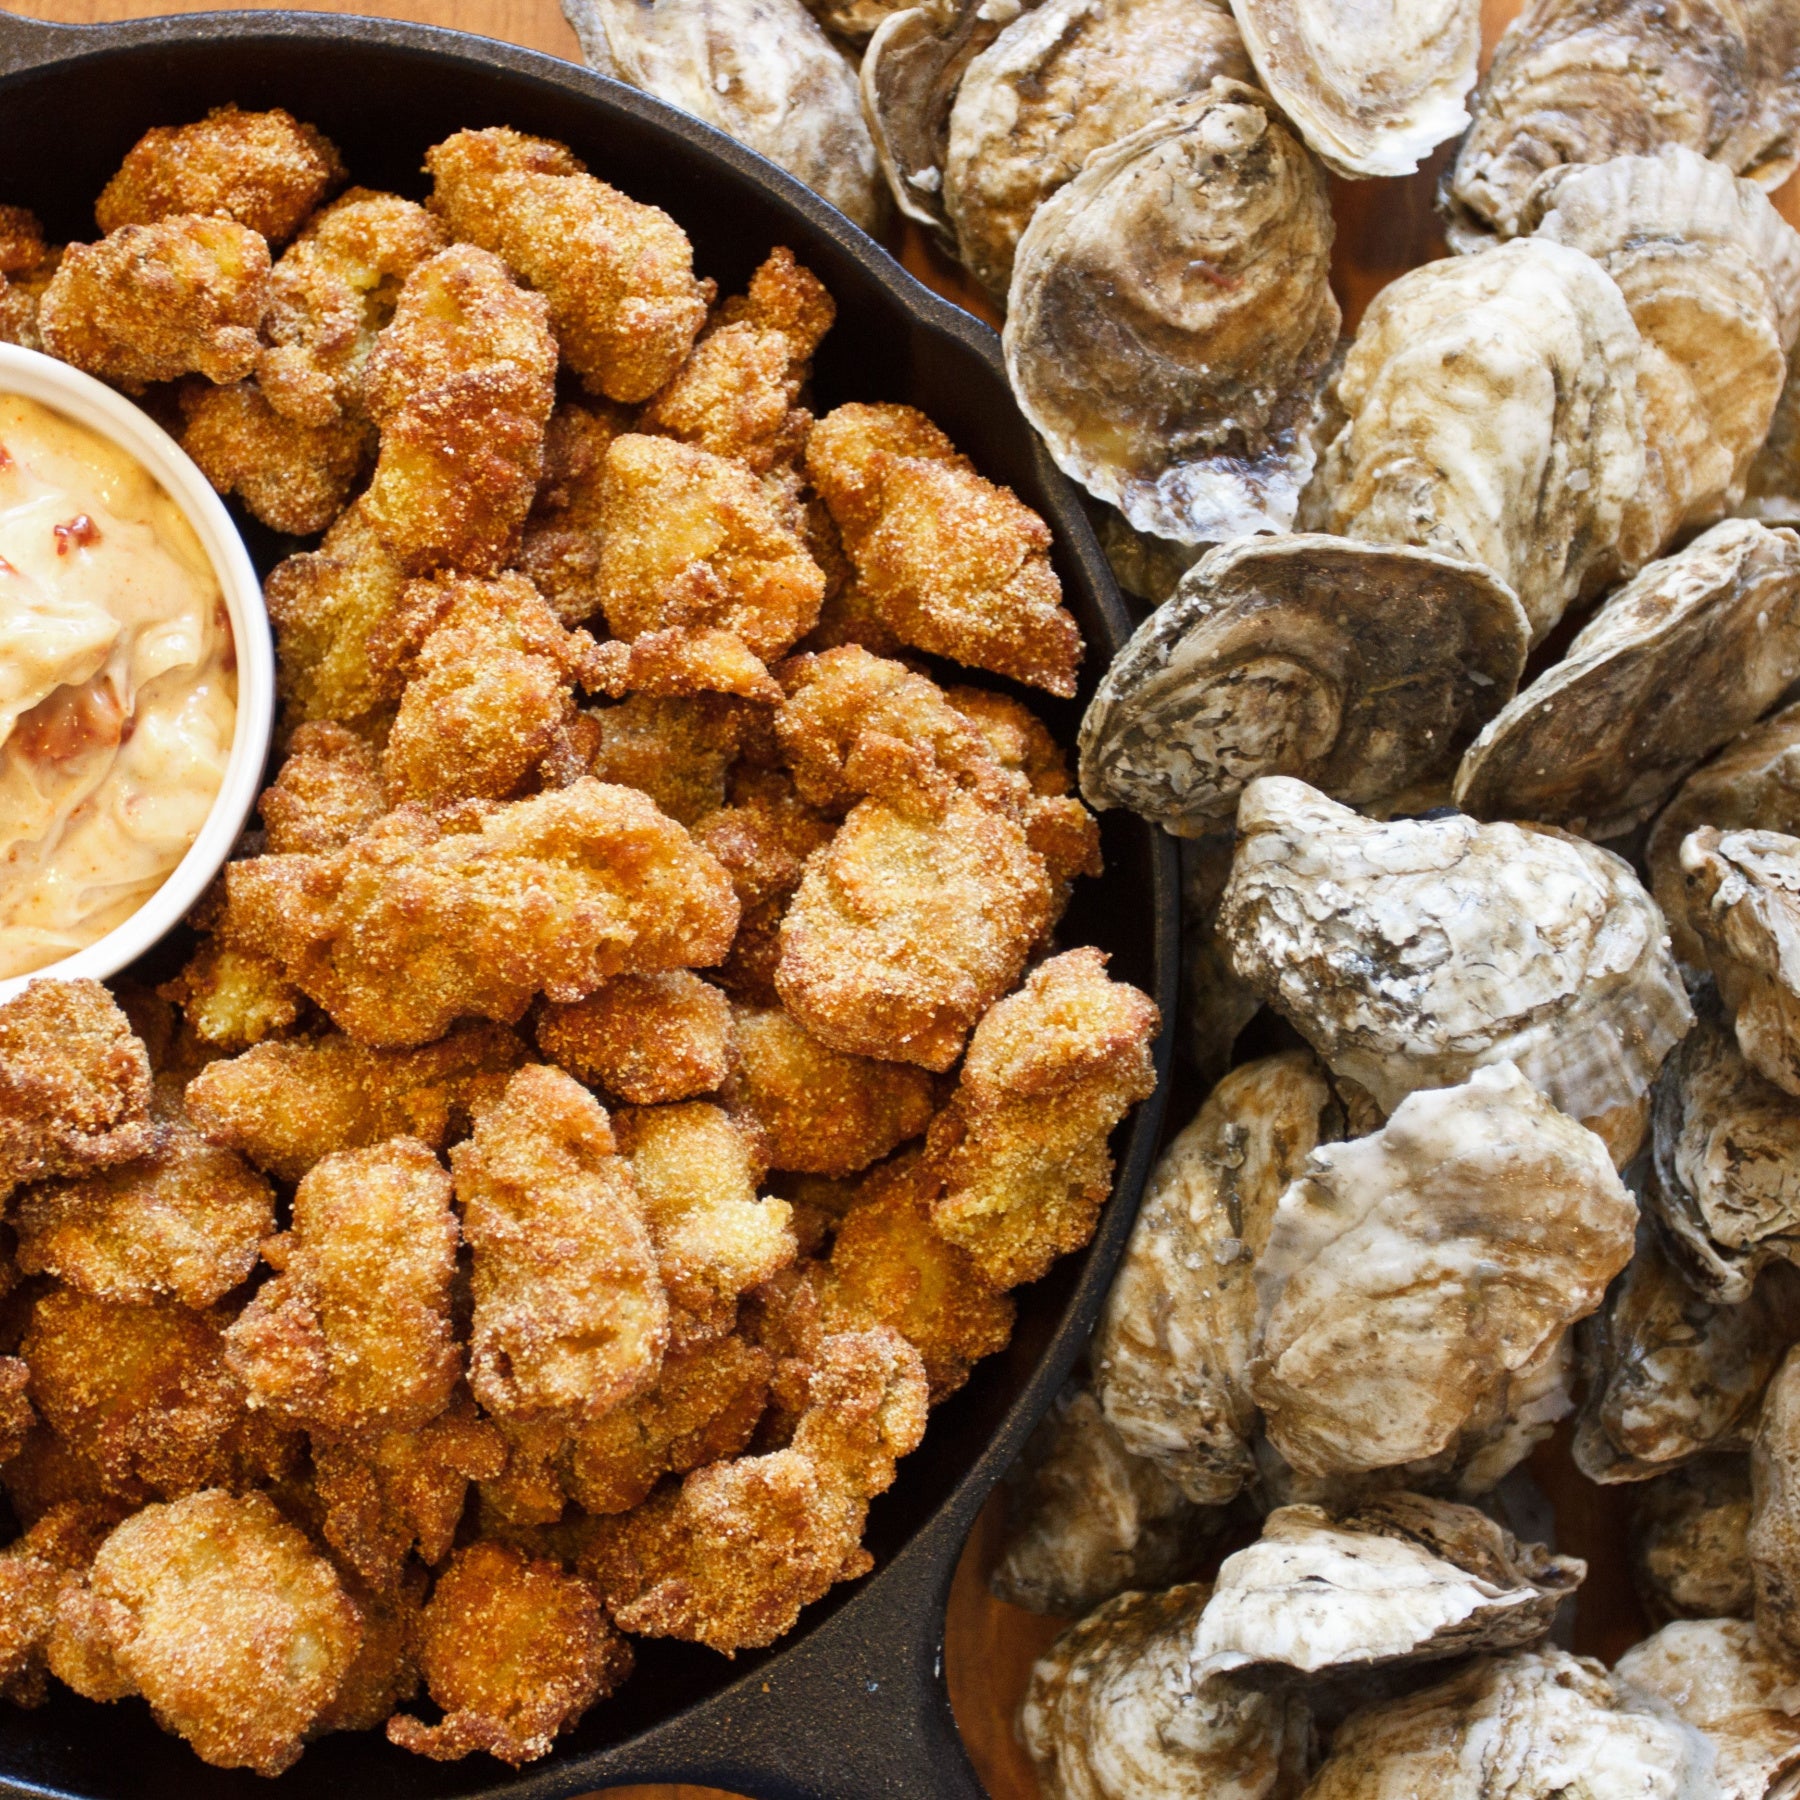 Chesapeake Bay Shucked Oysters